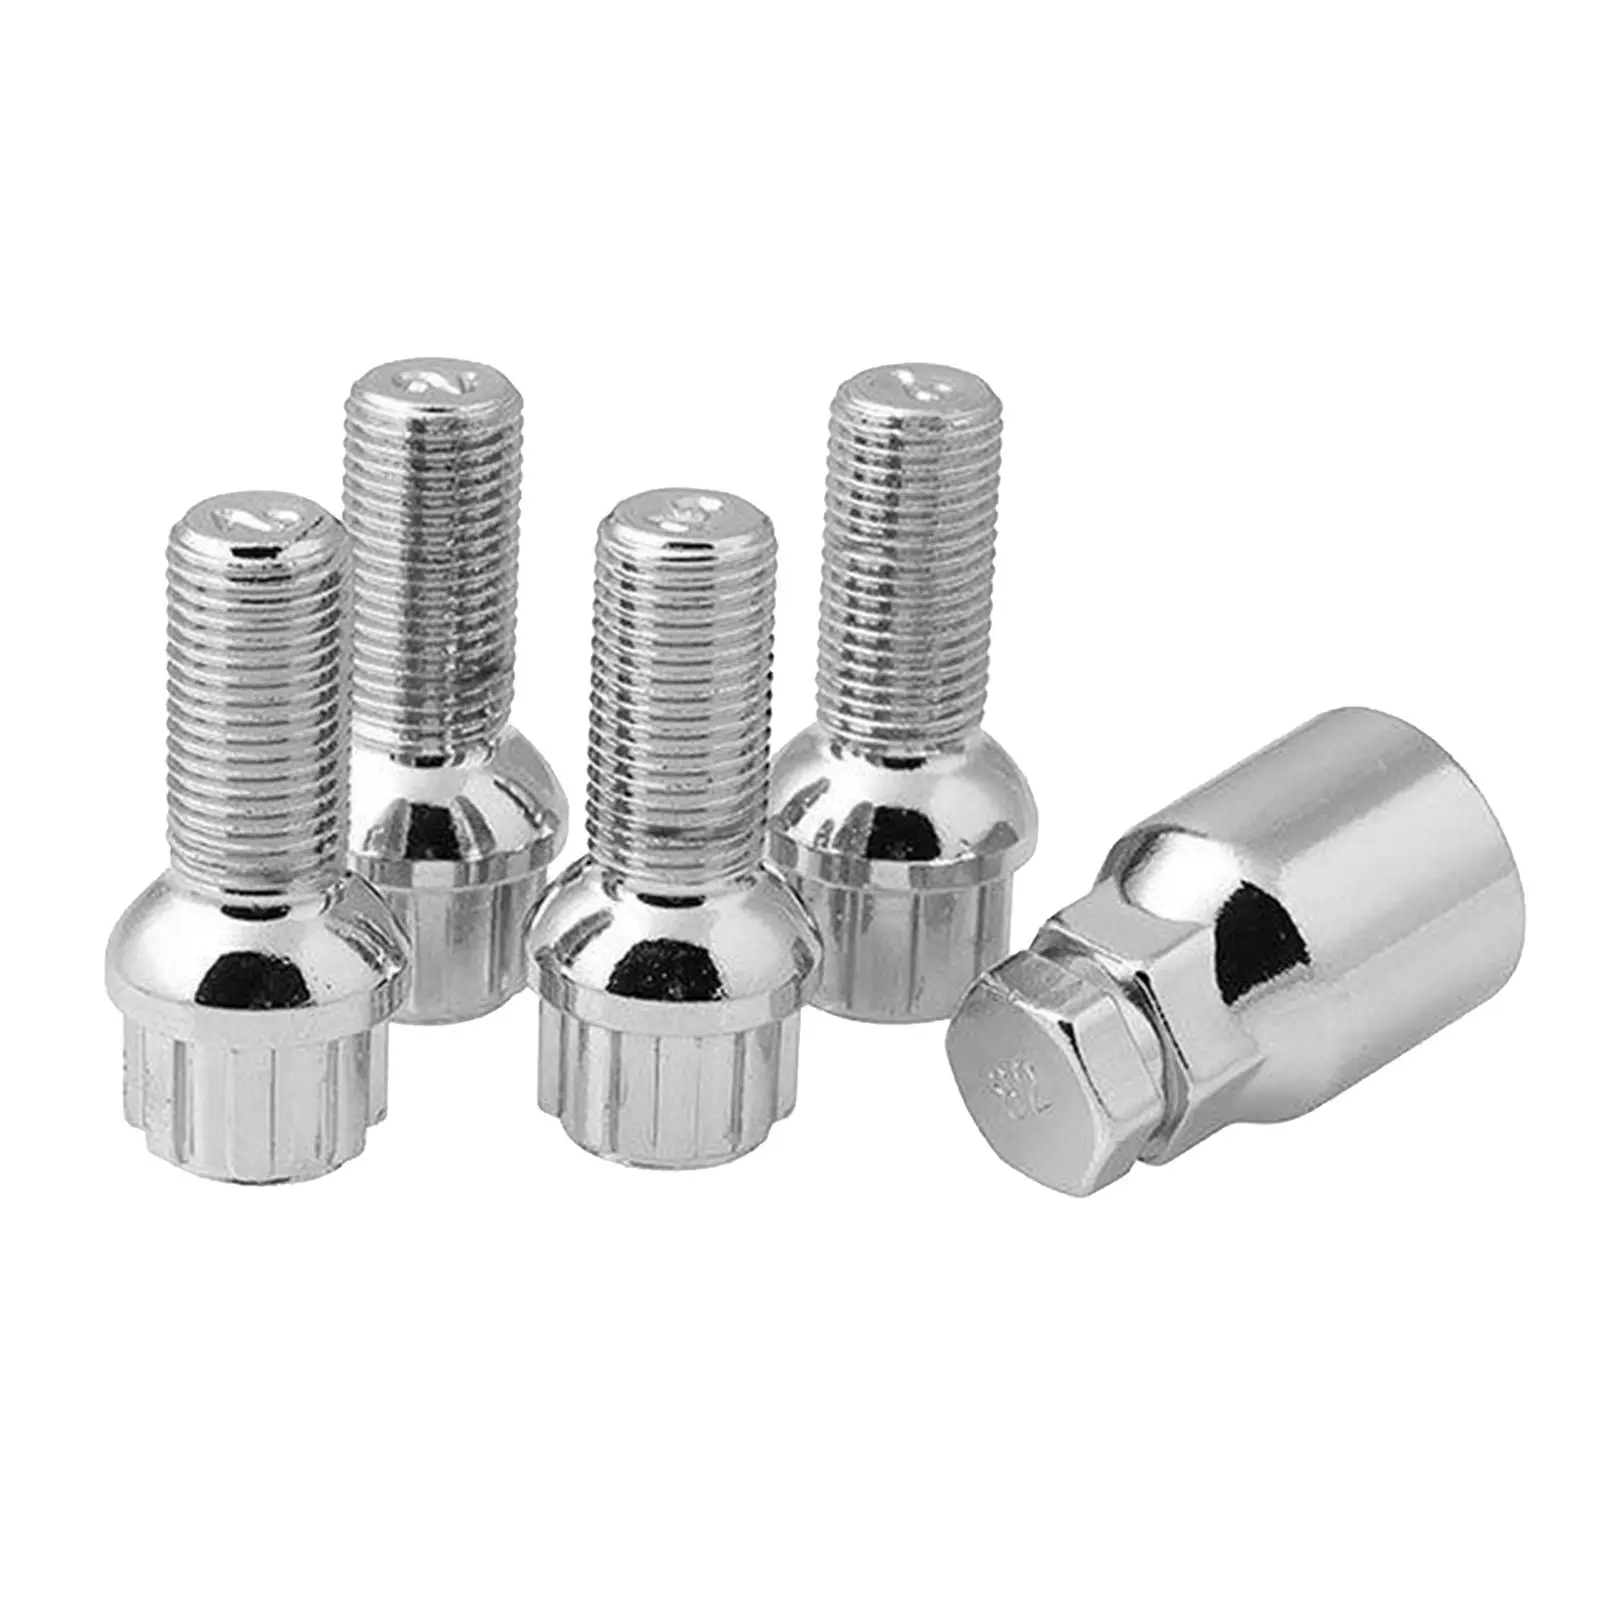 5pcs Iron Wheel Locking Bolt Fit for VW GOLF M14x1.5  Security Nuts, High Performance